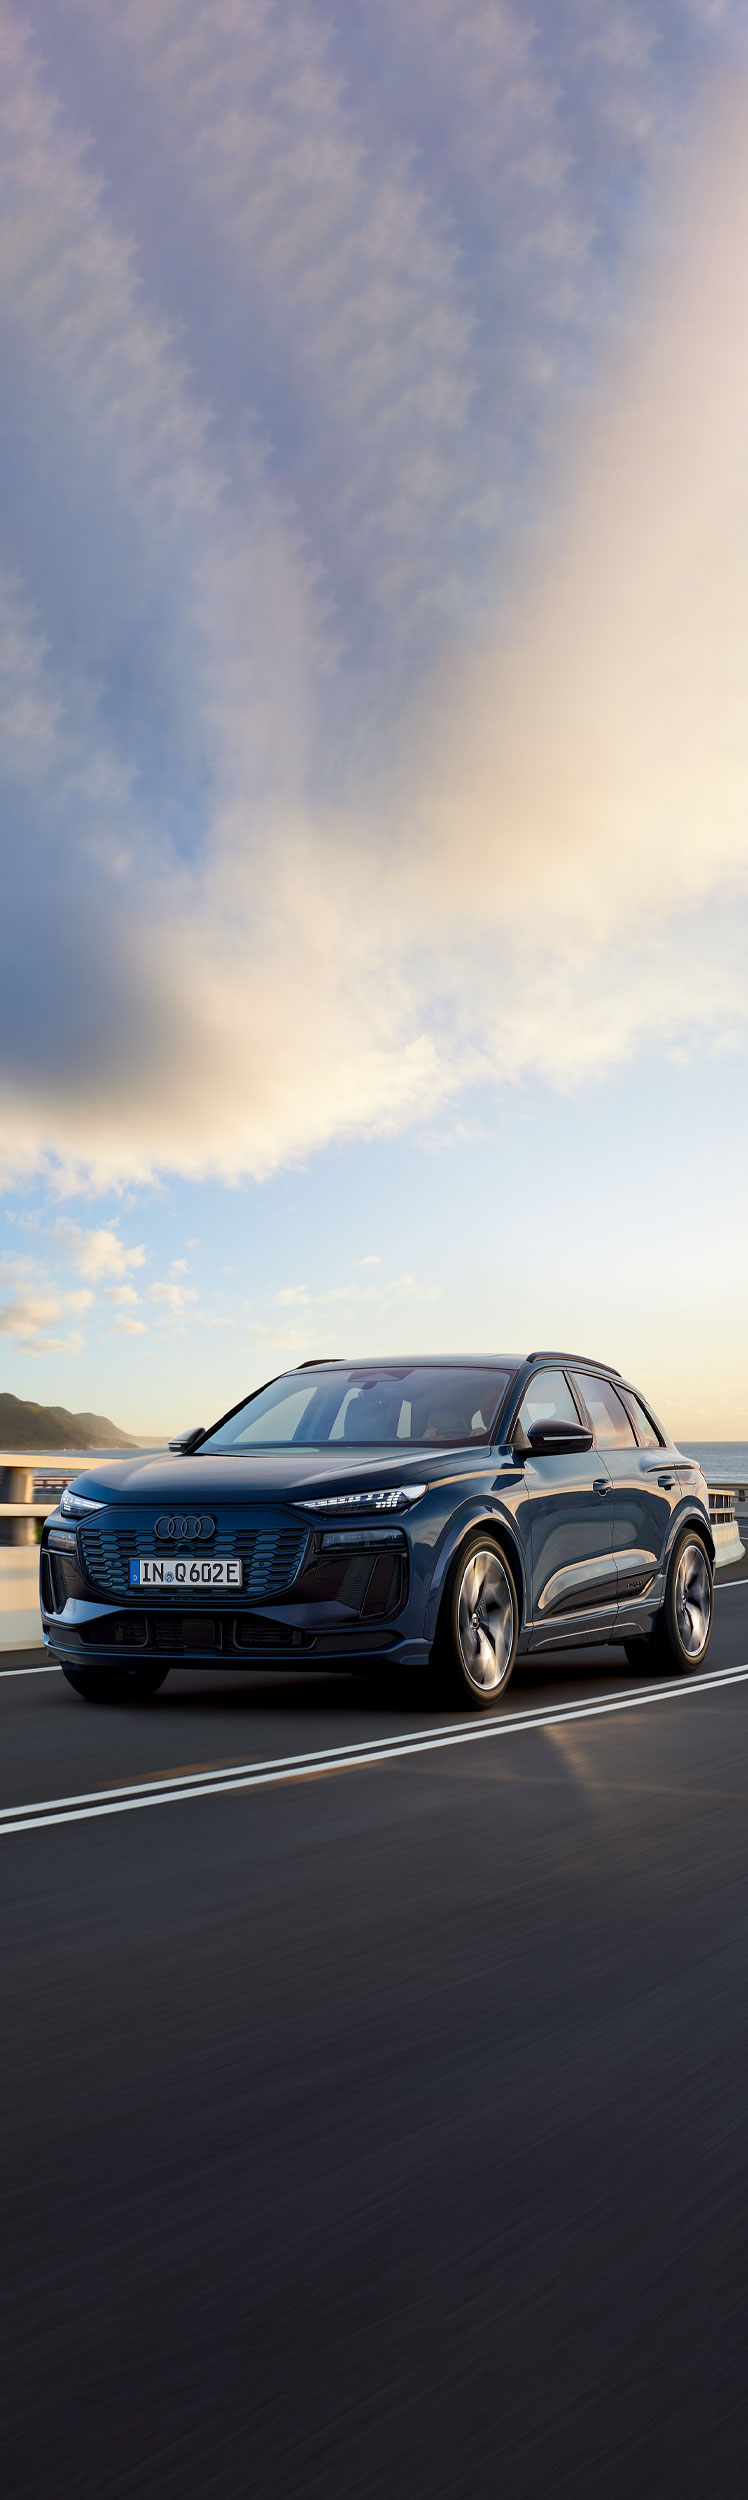 Three-quarter front view of the Audi Q6 e-tron in motion on a coastal road.